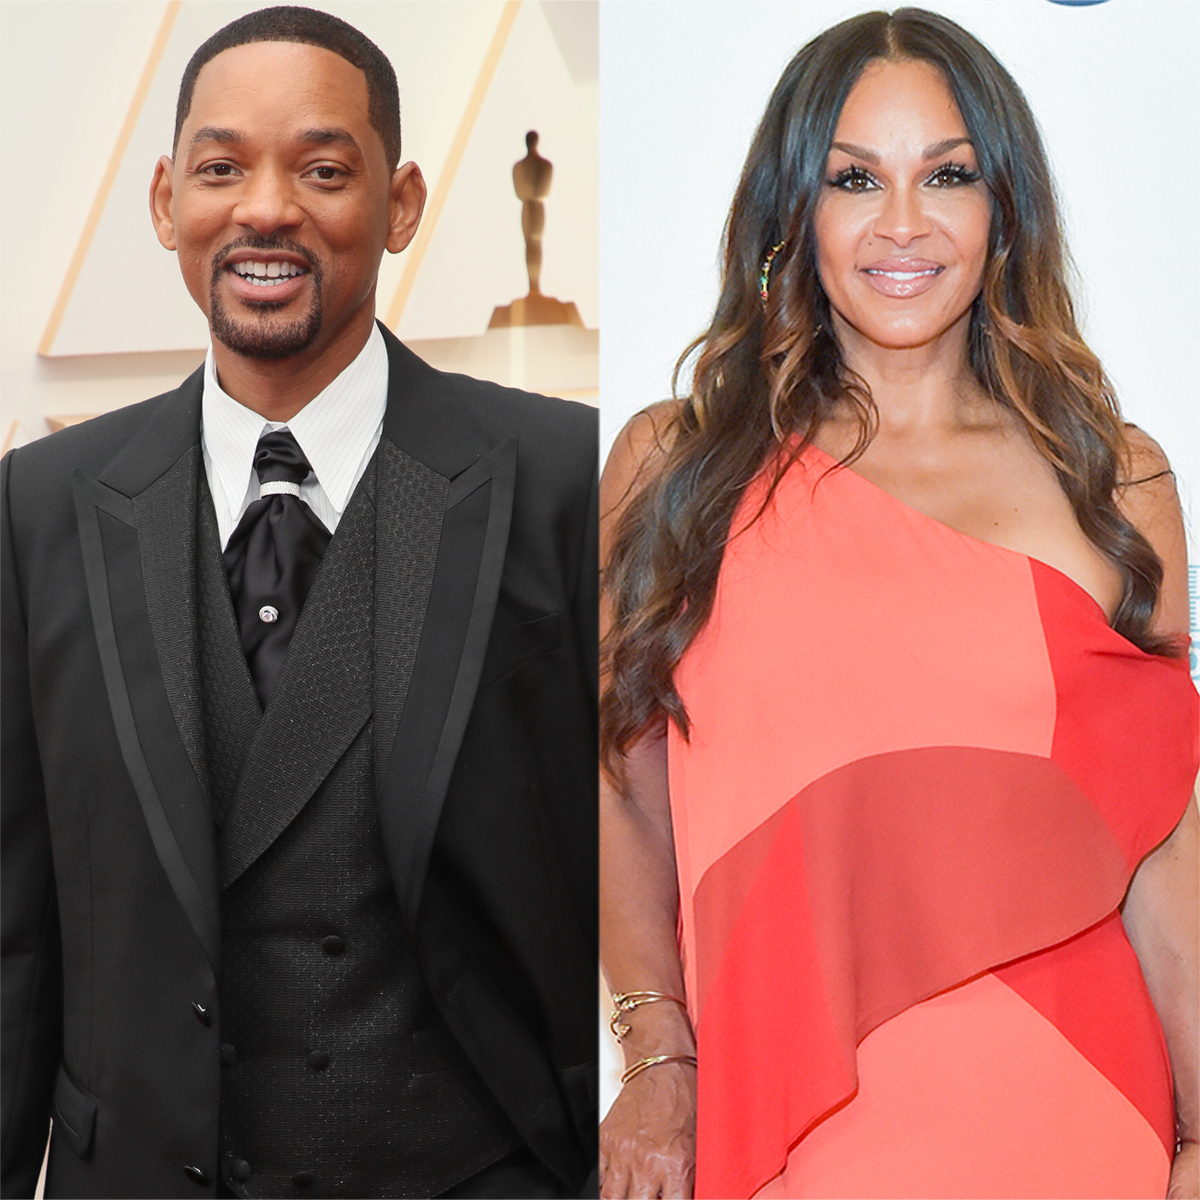 Sheree Zampino Shares Her “Hope” for Ex Will Smith After Oscars Slap